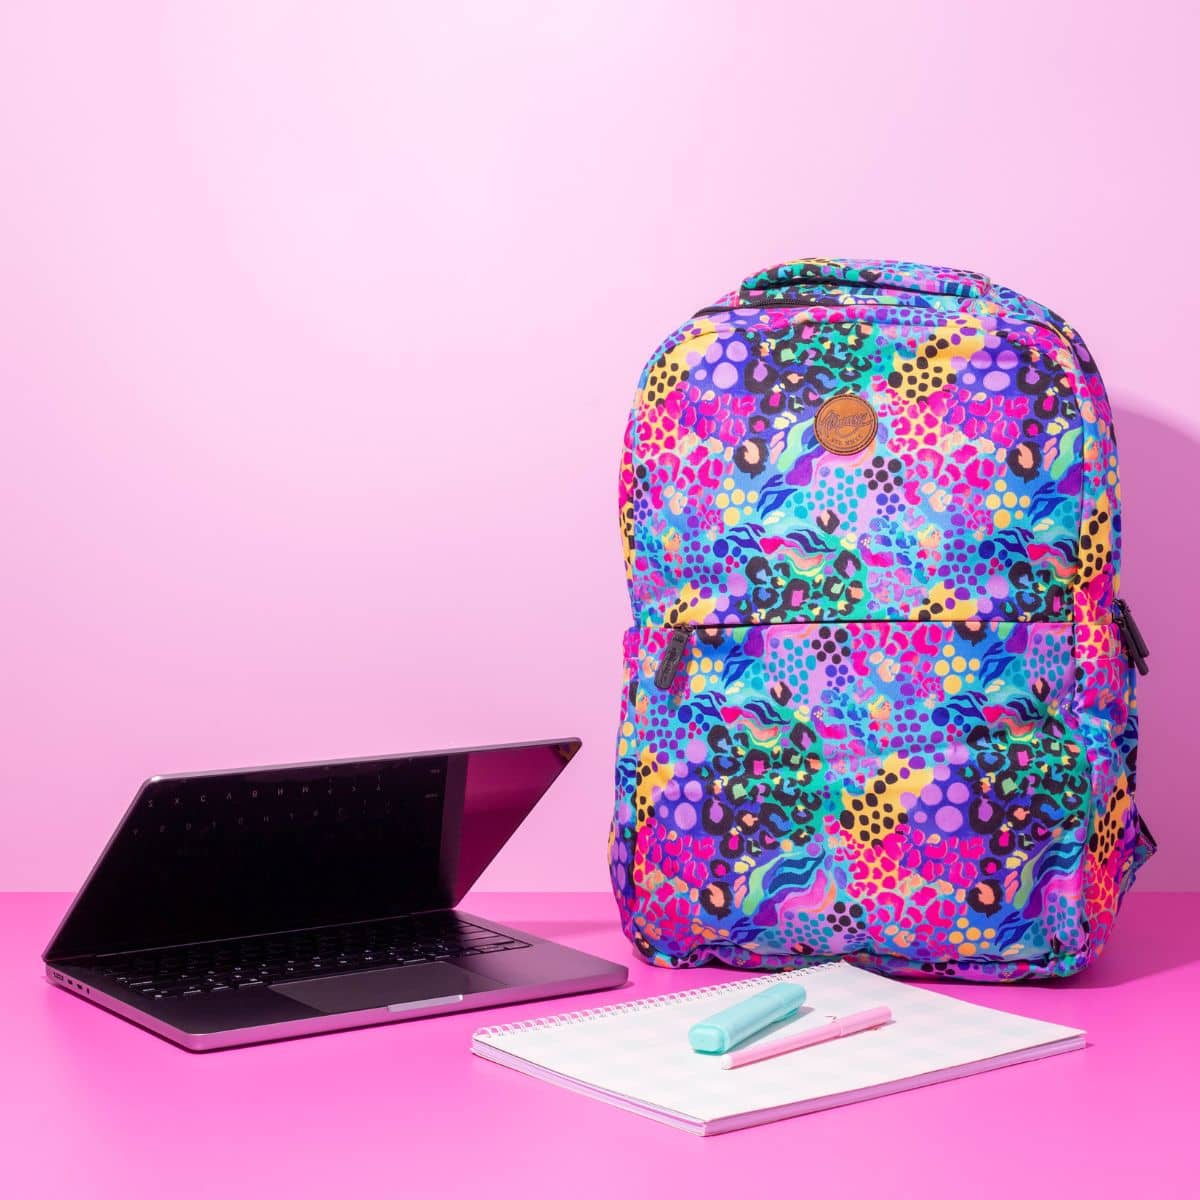 Alimasy Laptop Backpack - Kasey Rainbow - Electric Leopard